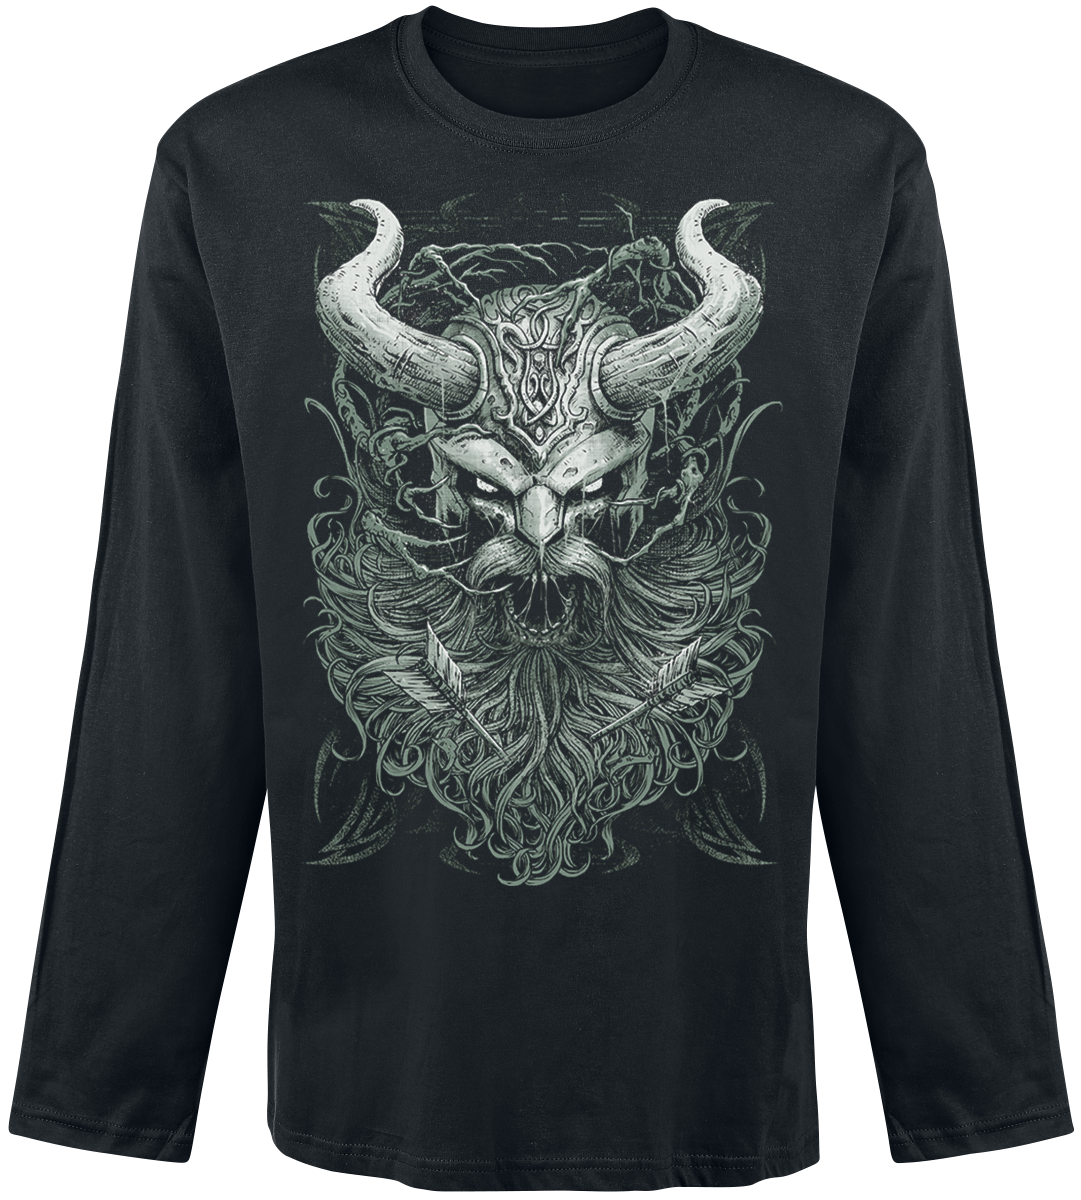 Black Premium by EMP - Rock And Roll Dreams Come Through - Longsleeve - black image